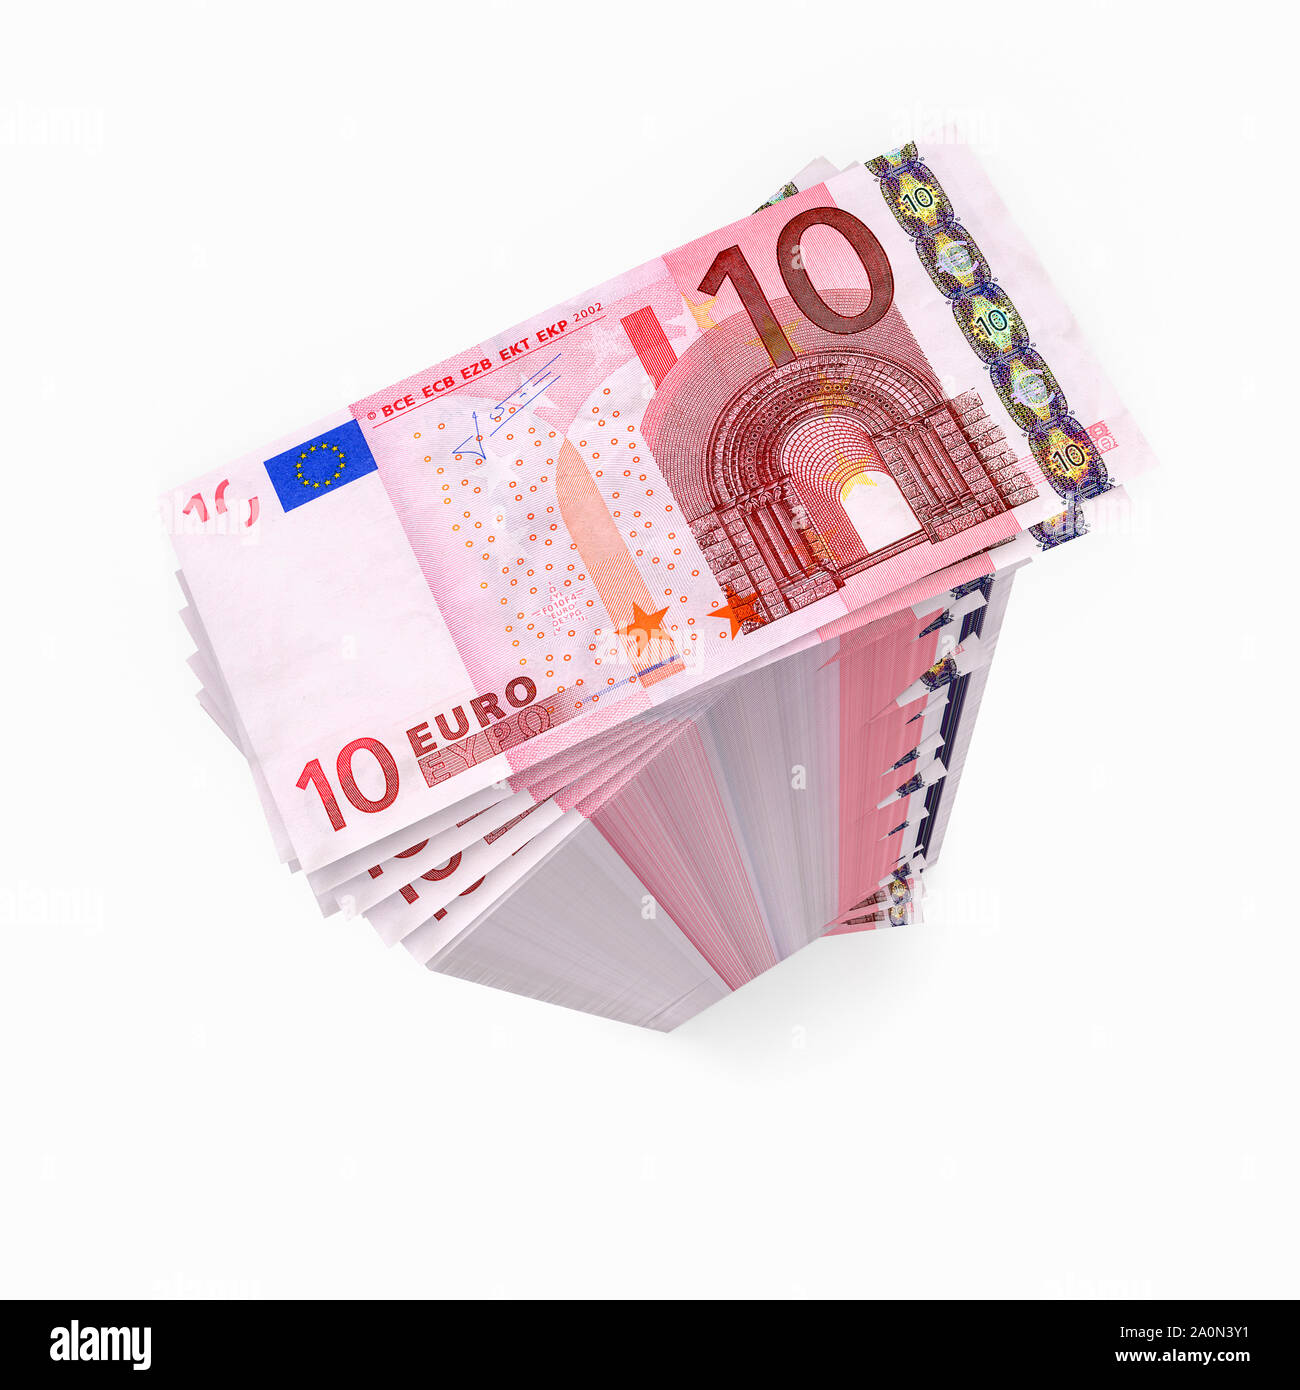 Tall pile of Euro banknotes currency Stock Photo